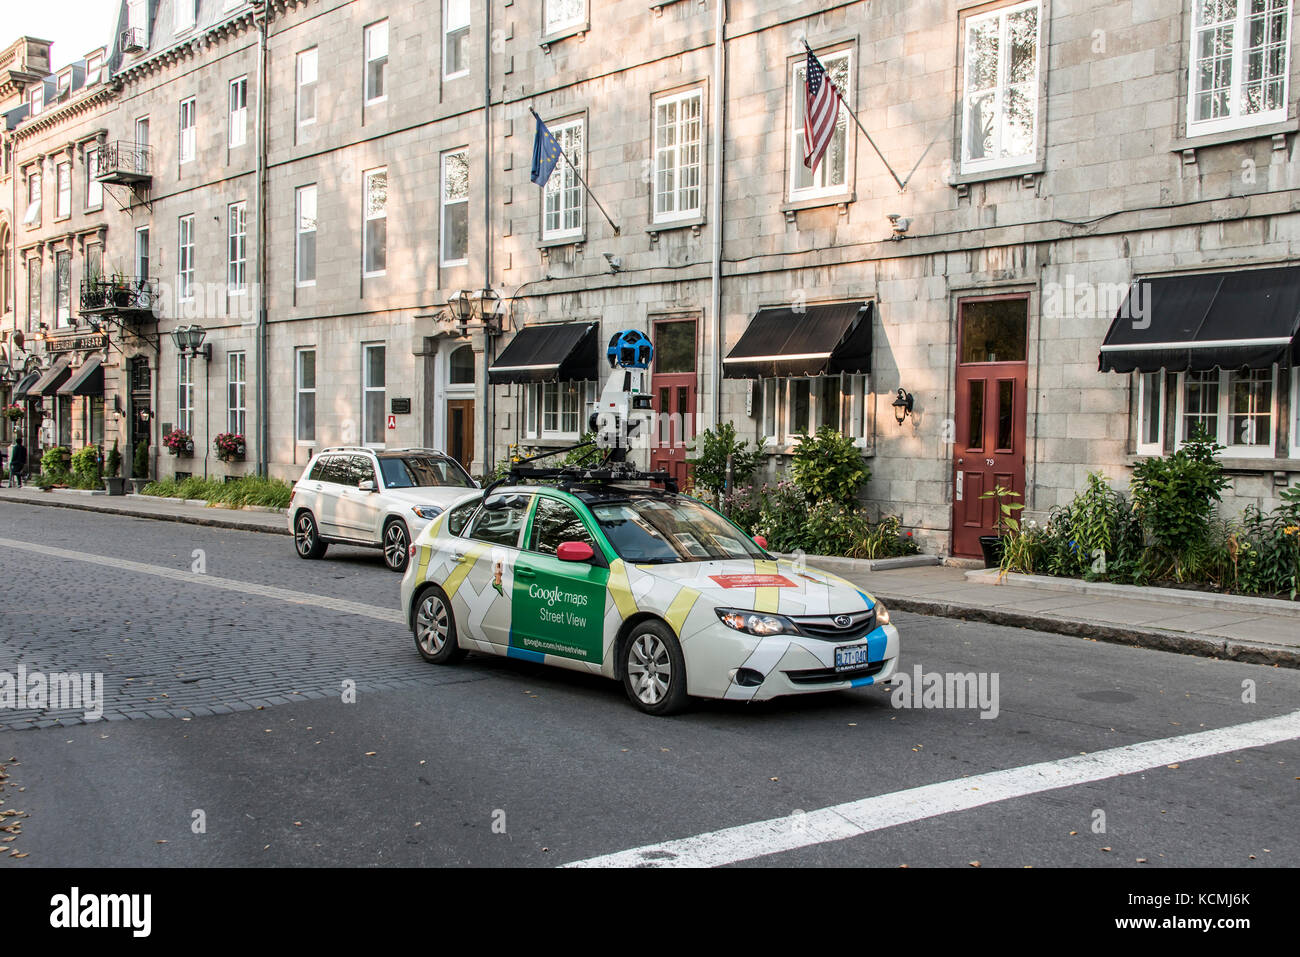 Quebec City Canada - 11.09.2017 Google Street View vehicle car apping streets throughout the city center of Quebec Stock Photo